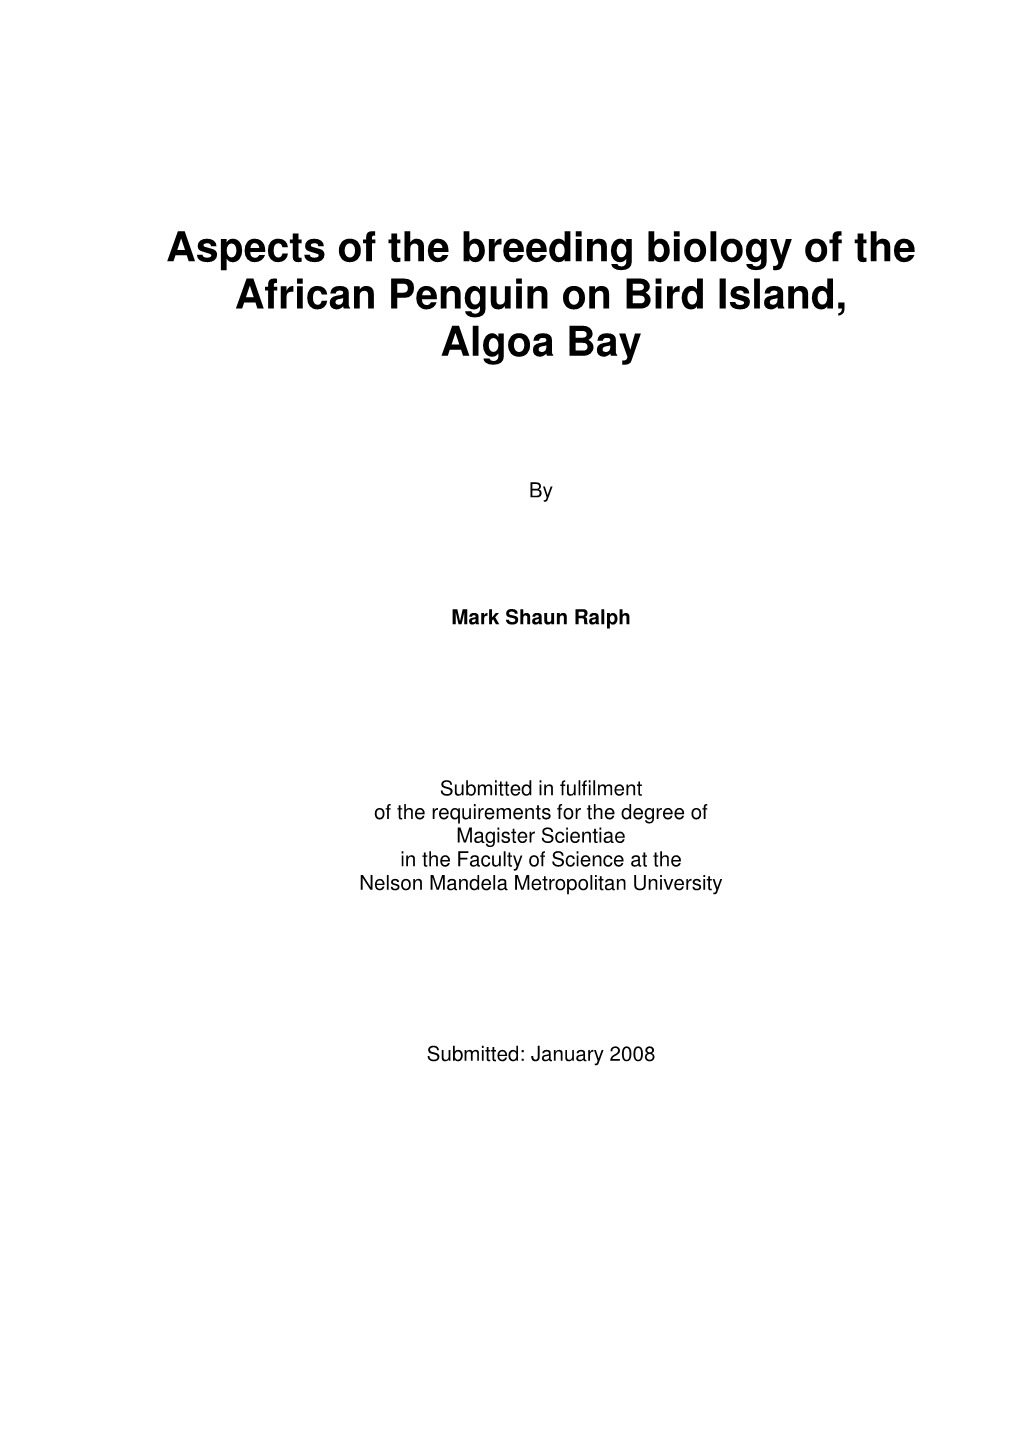 Aspects of the Breeding Biology of the African Penguin on Bird Island, Algoa Bay